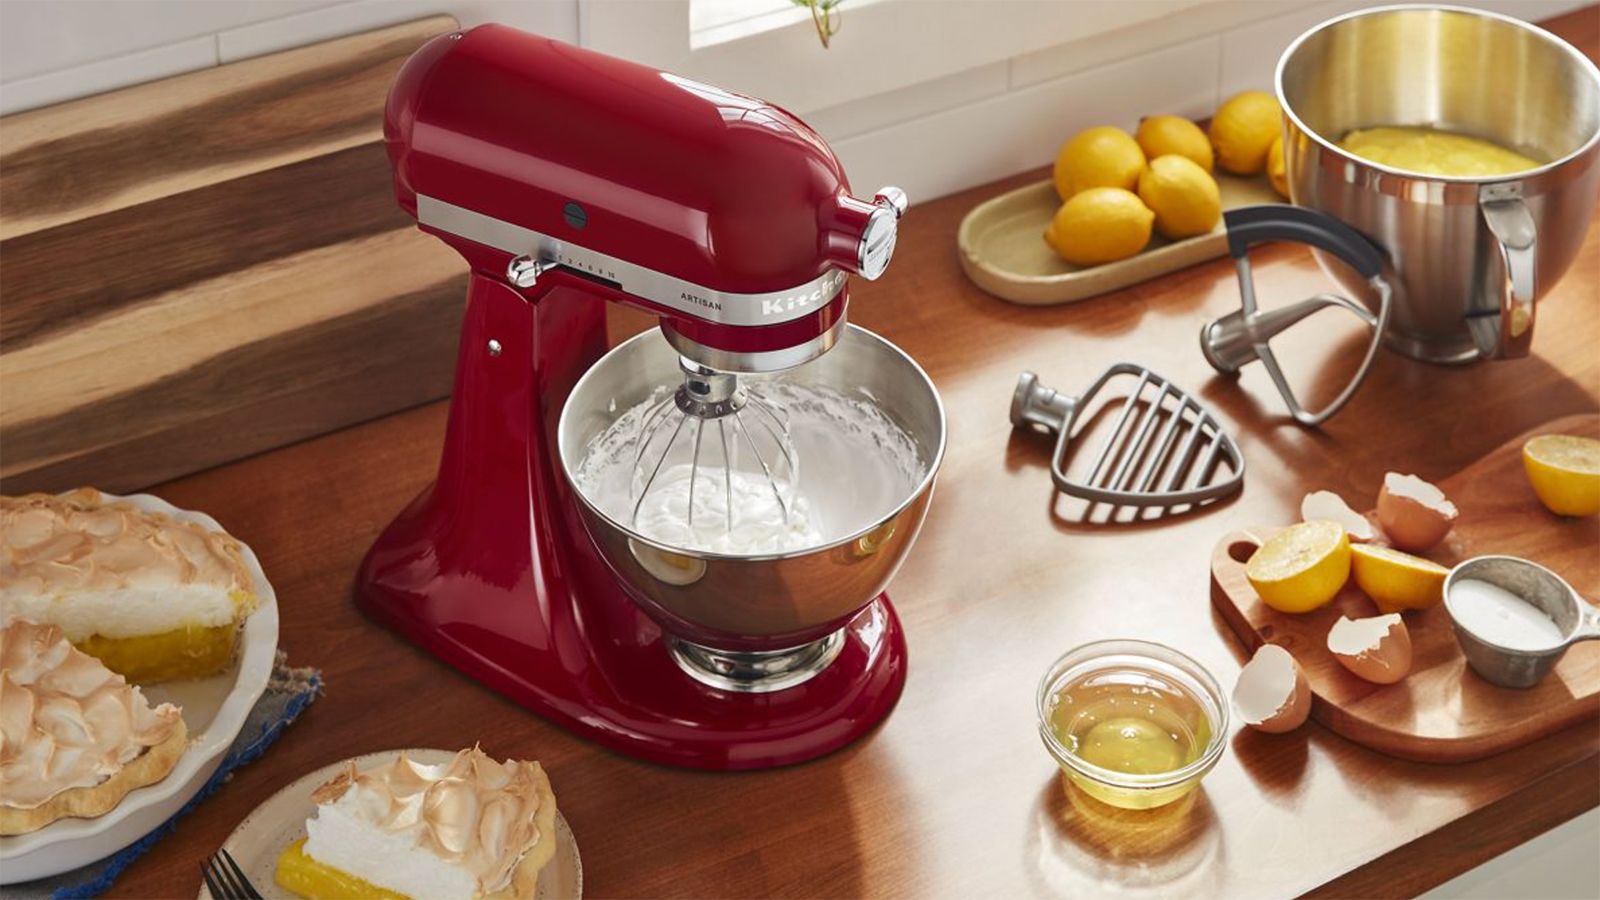 Kitchen Aid Stand Mixer Top 10 Holiday Gift Ideas for Her